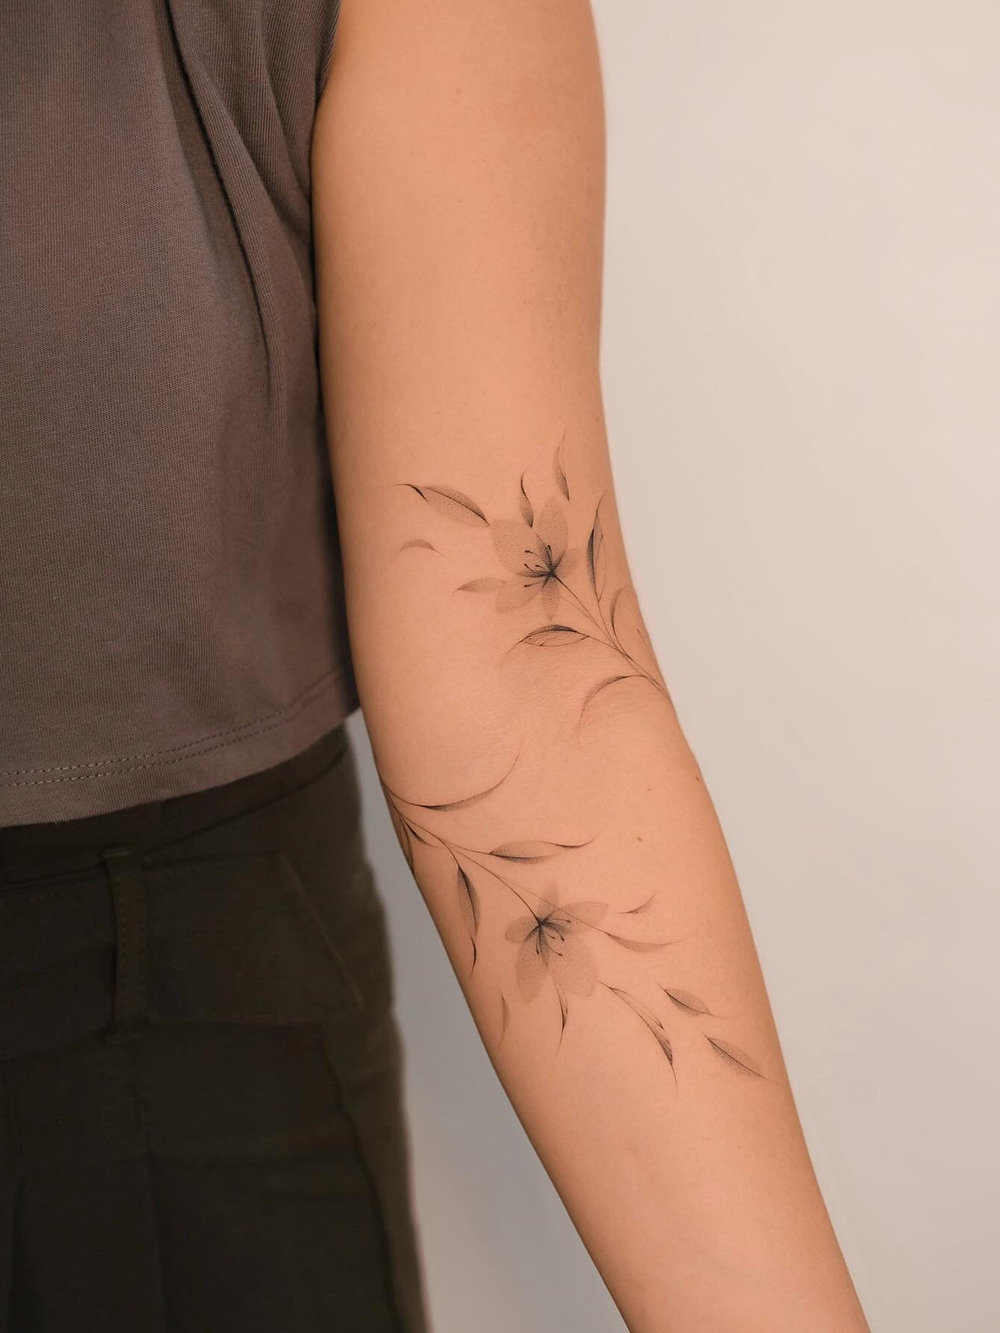 Delicate and Fine Line Flower Tattoo Ideas on Arm